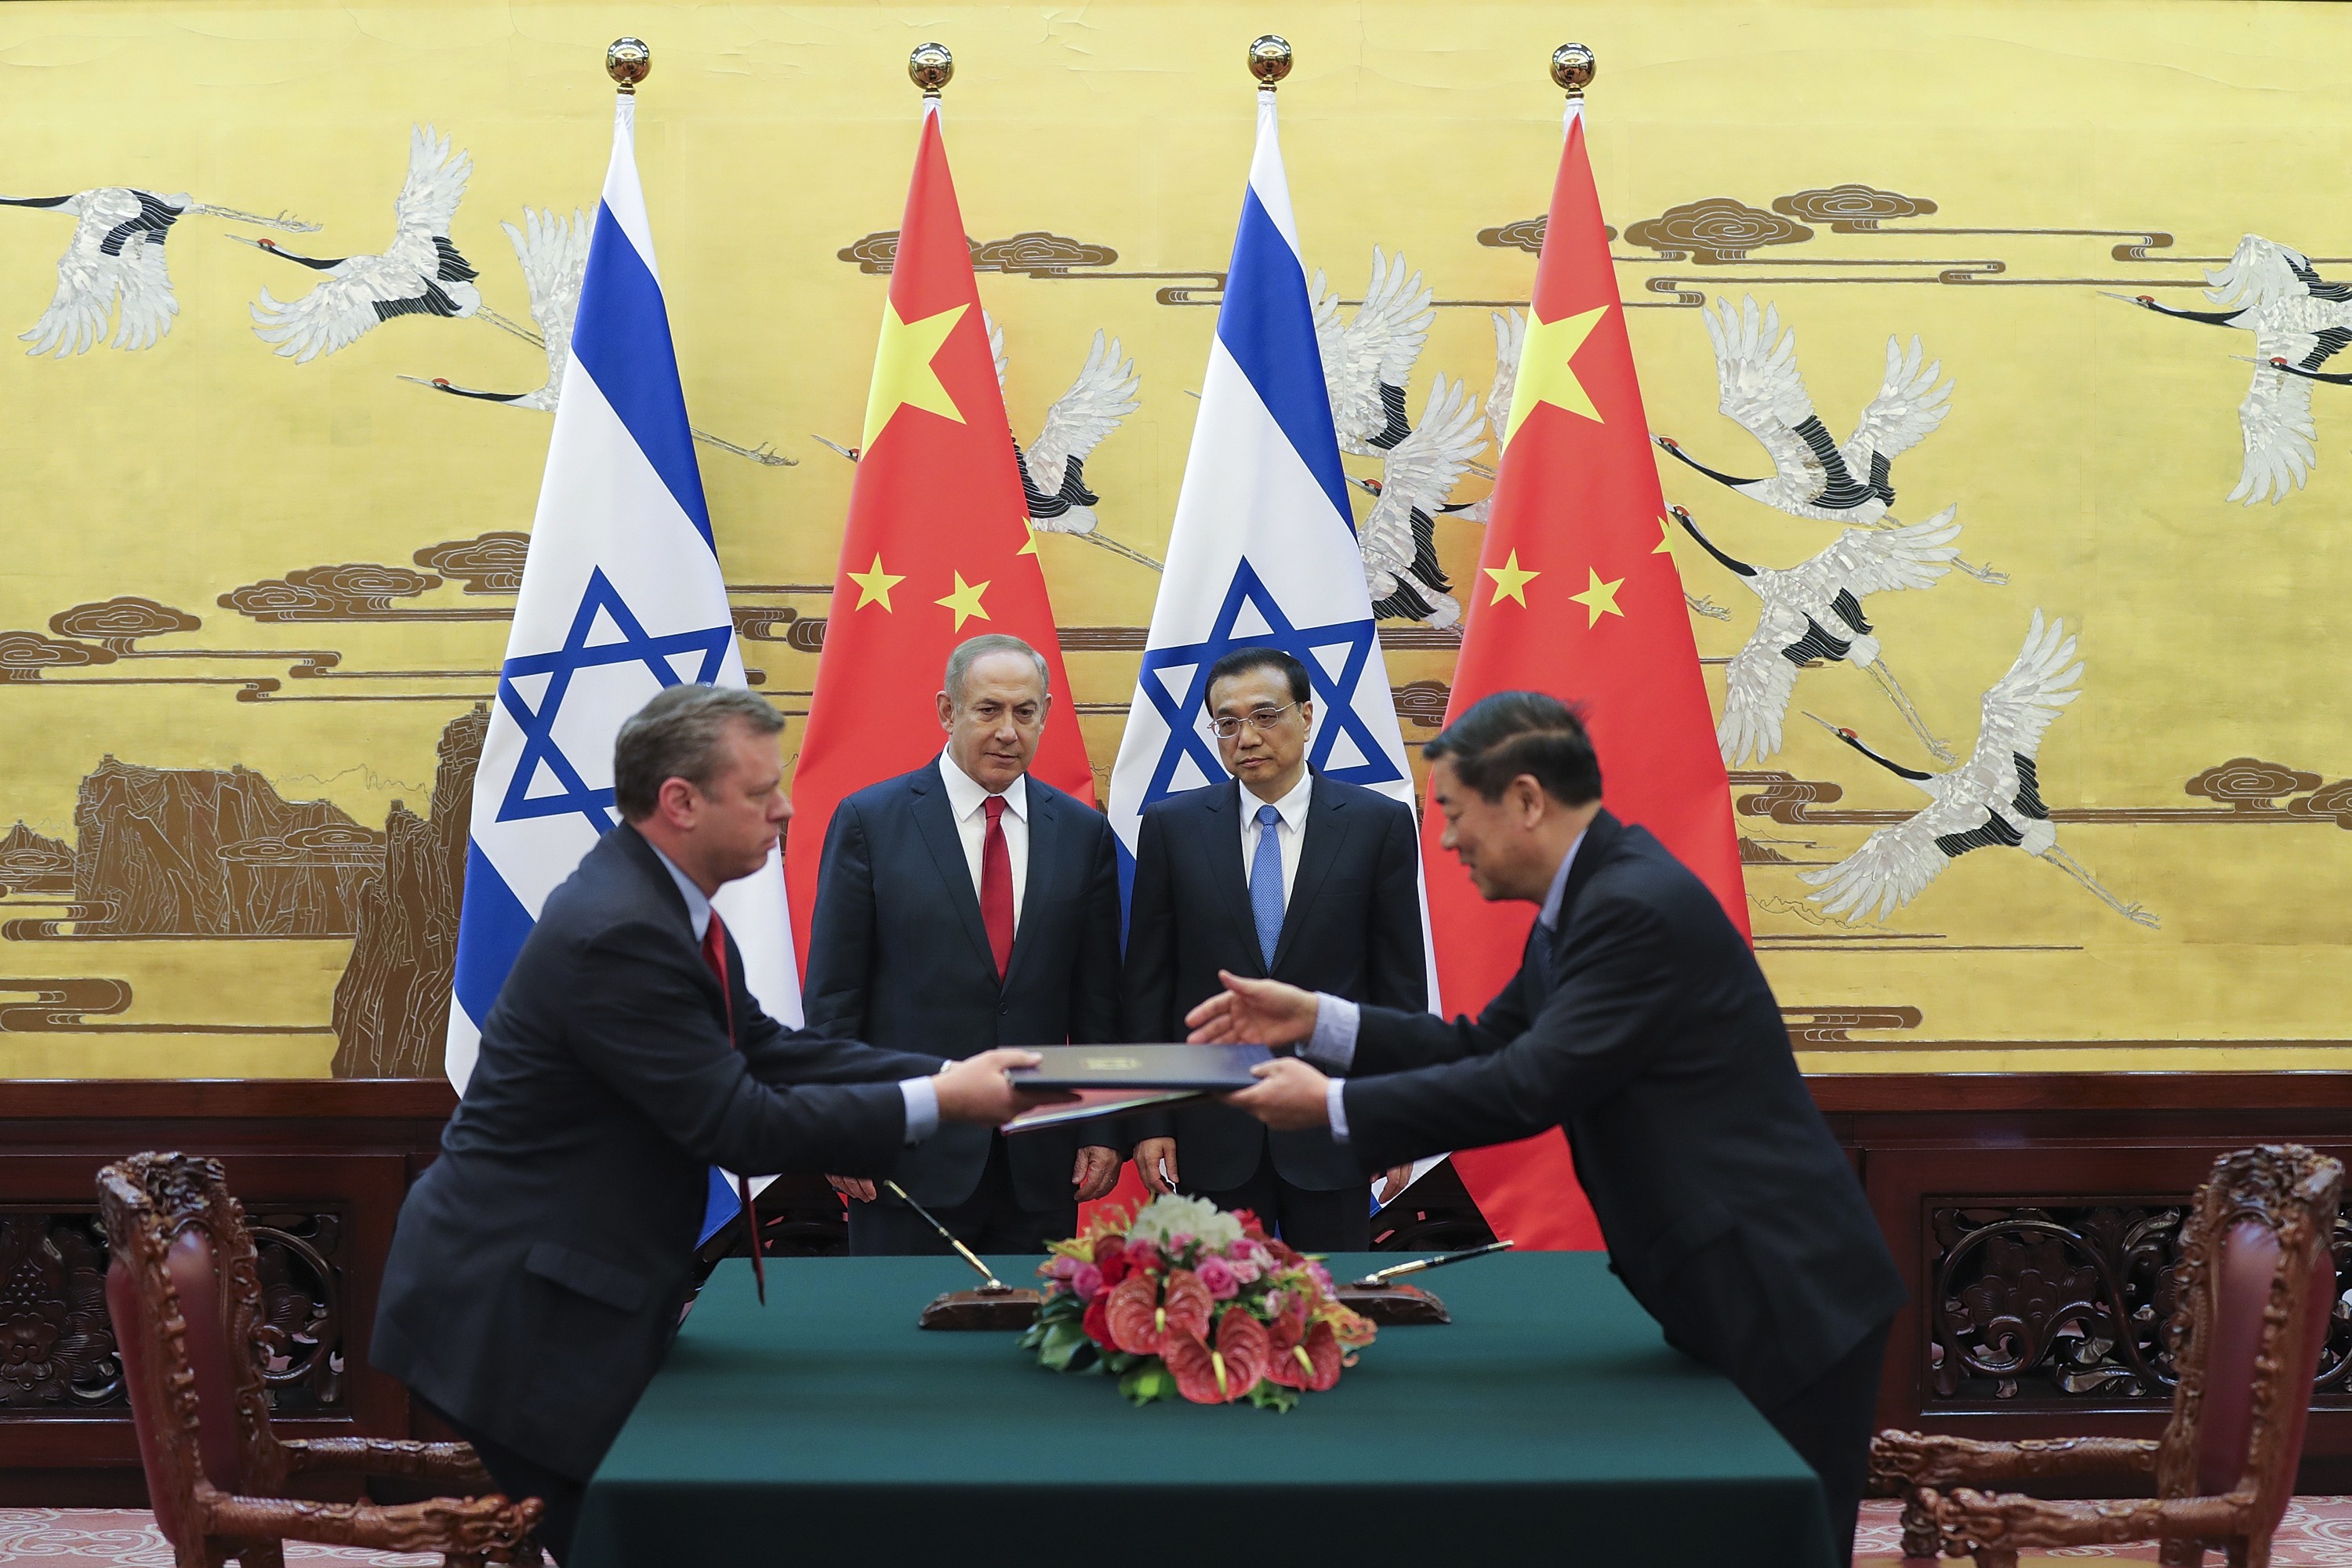 China’s total investment in Israel almost tripled last year to US$16 billion, largely in the hi-tech industry. So what’s behind the soaring demand?